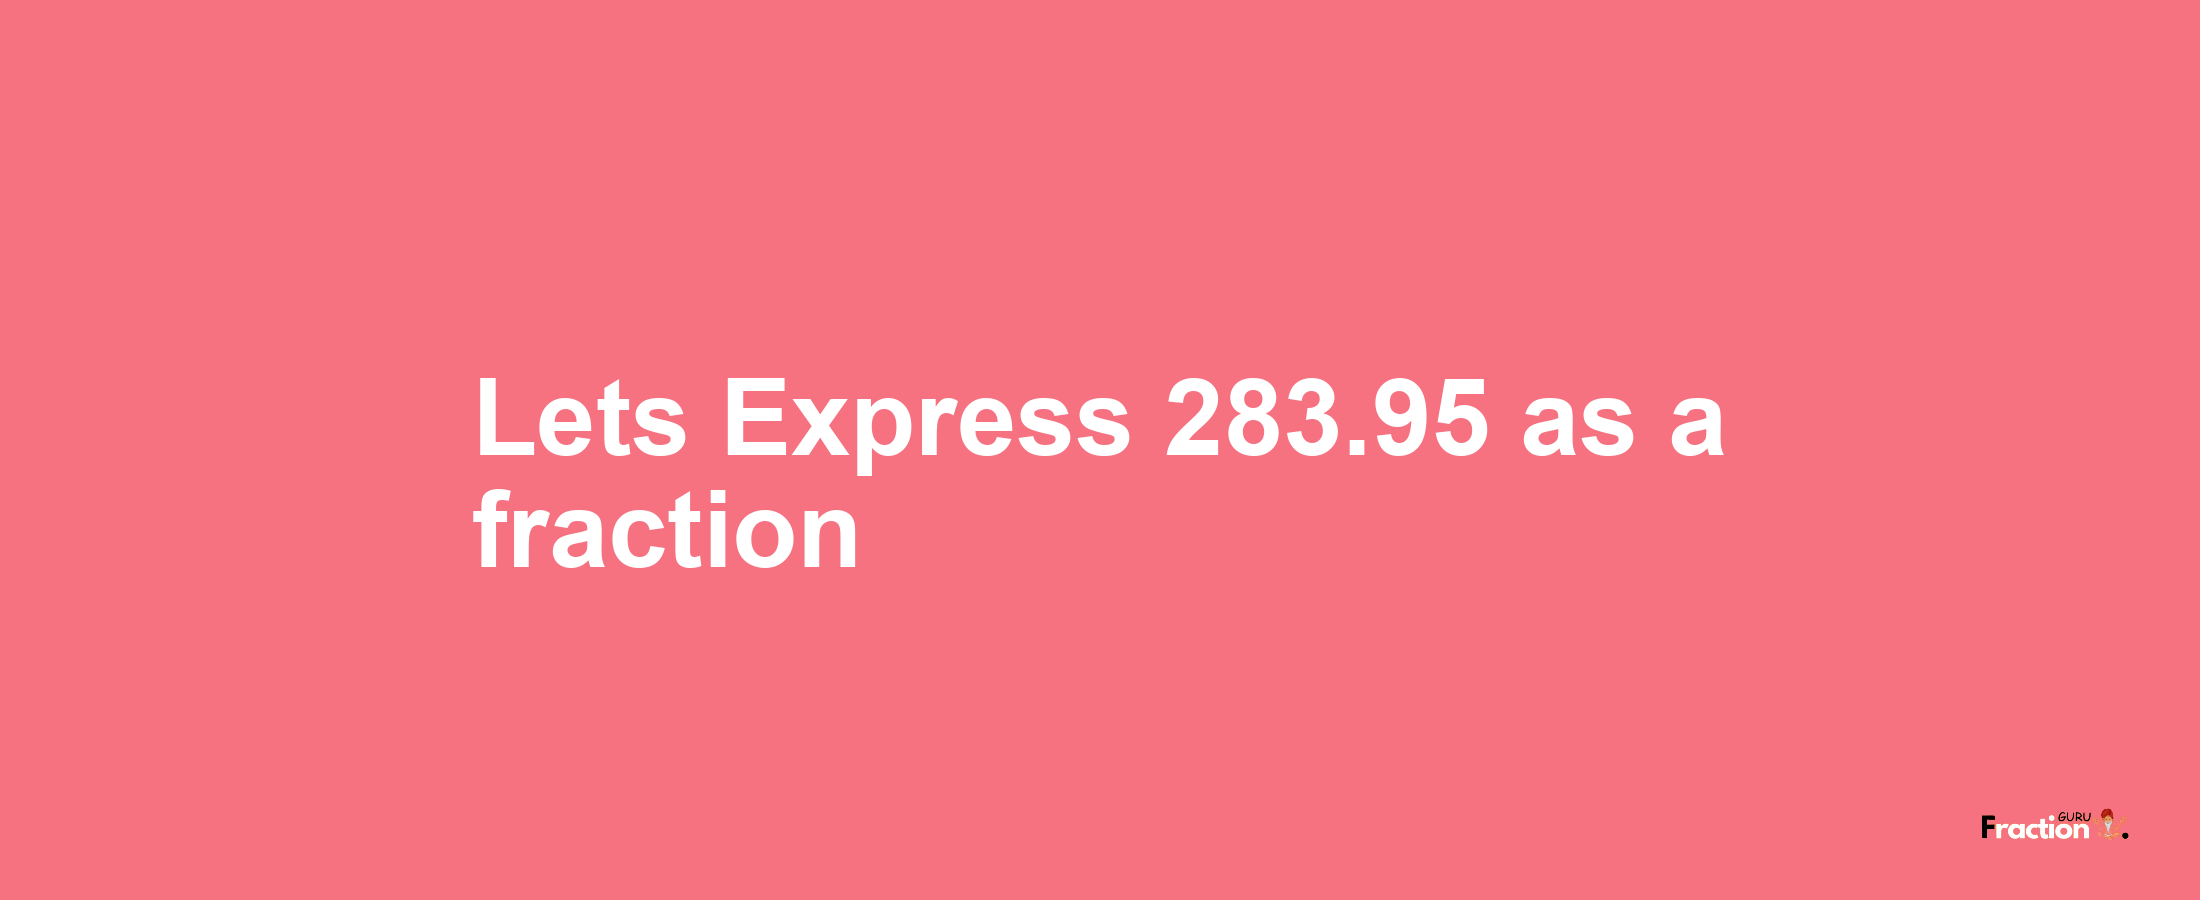 Lets Express 283.95 as afraction